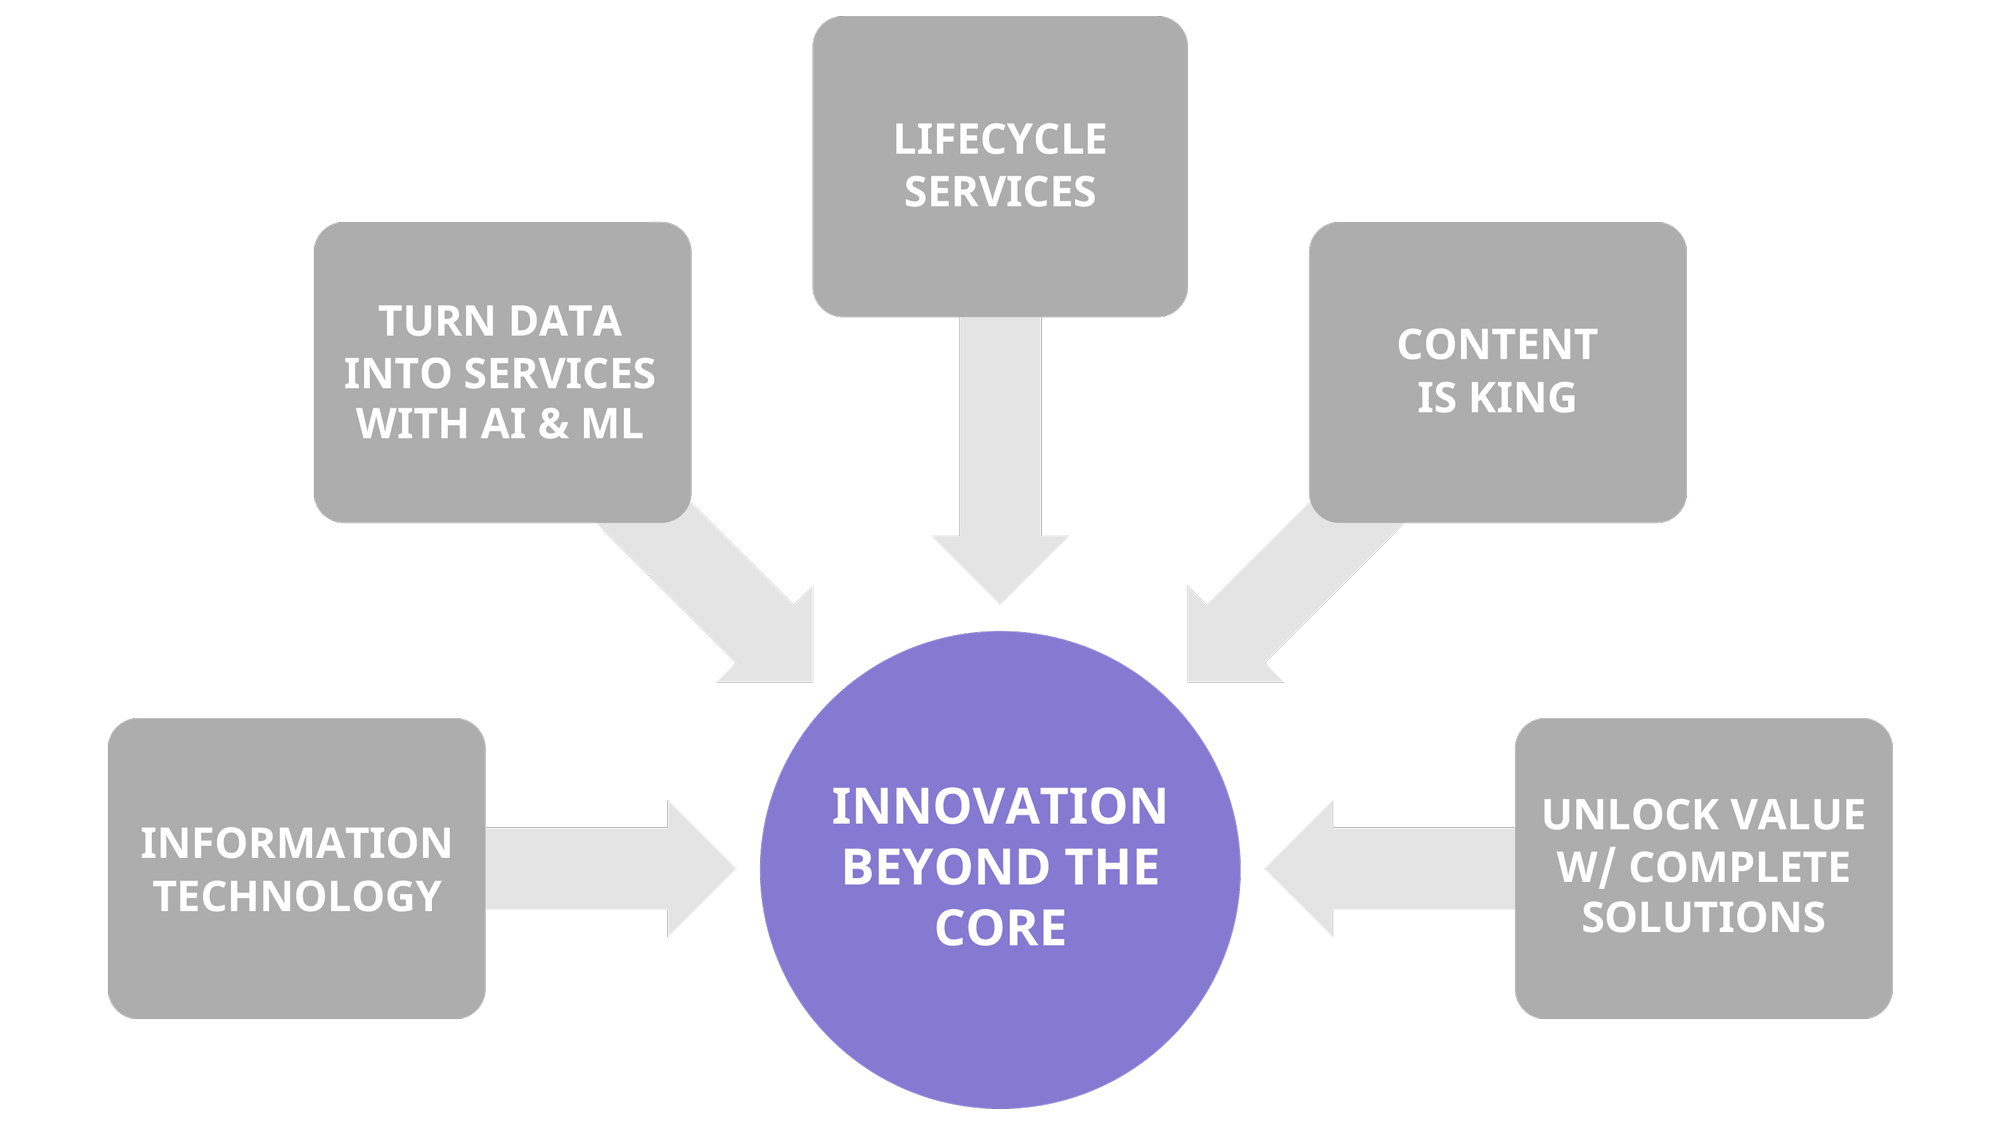 Five Methods for innovation beyond the core